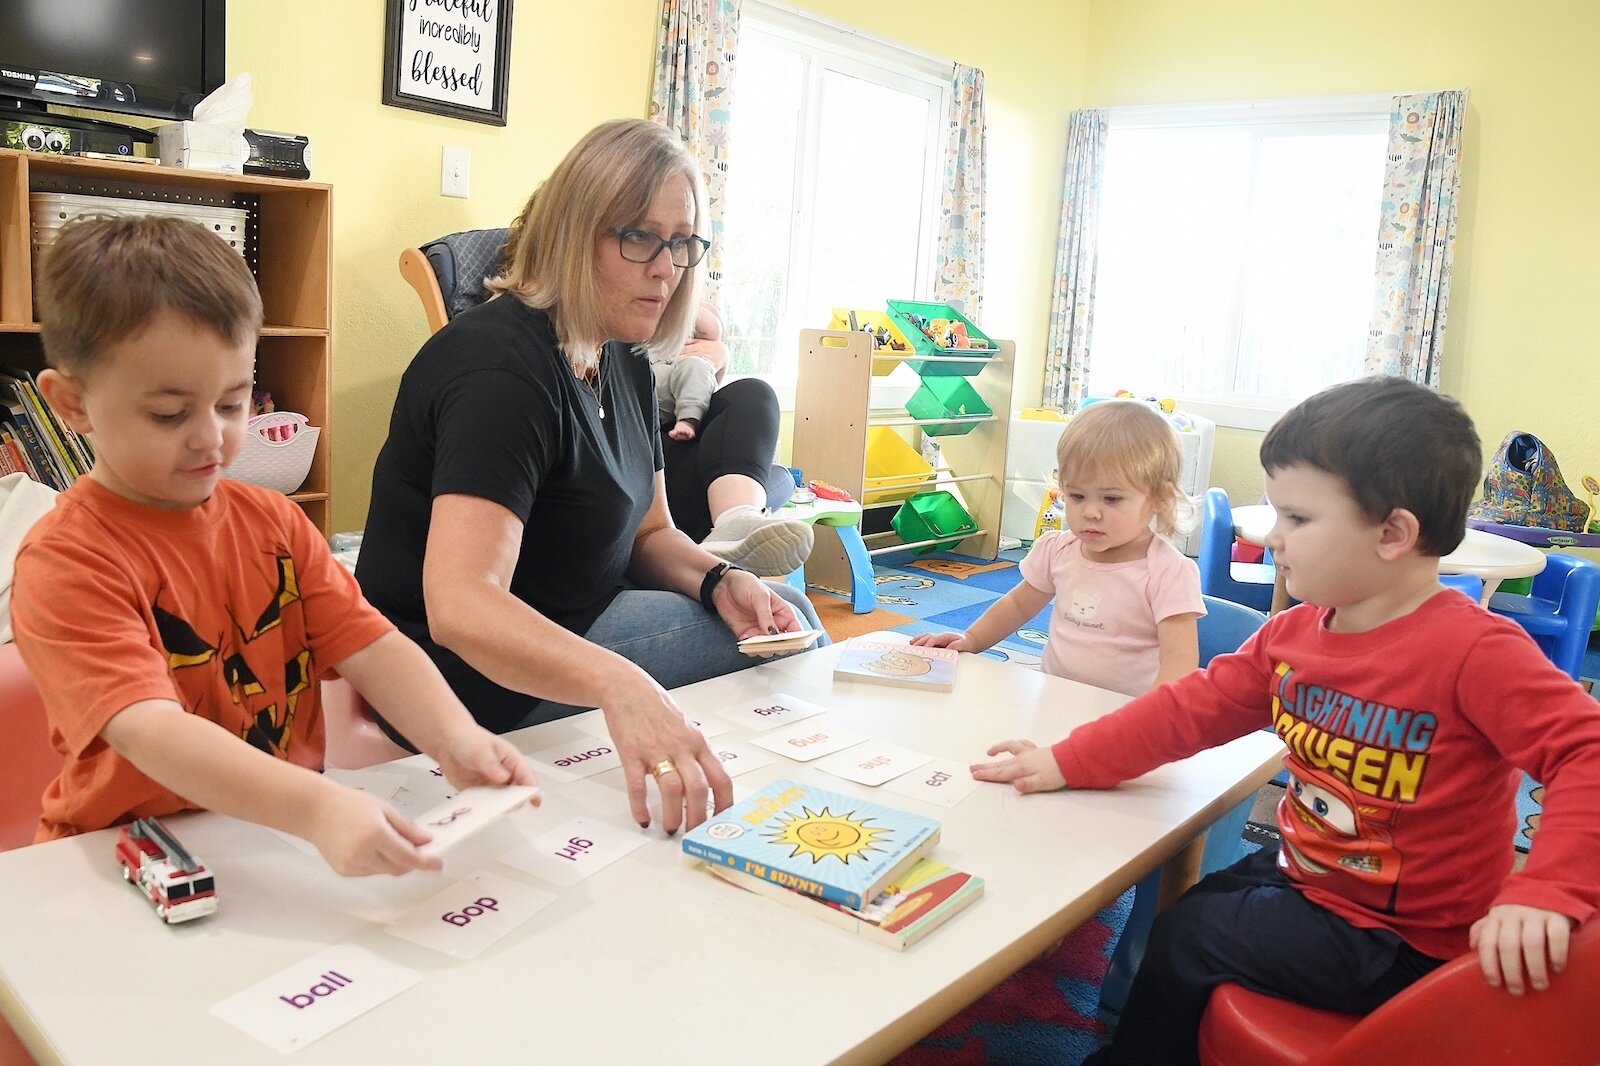 Stacey Olsen works with, from left, Jaxon Meek, Riley Furguson, and Jameson Eickhoff at Rose of Sharon Child Development Center.